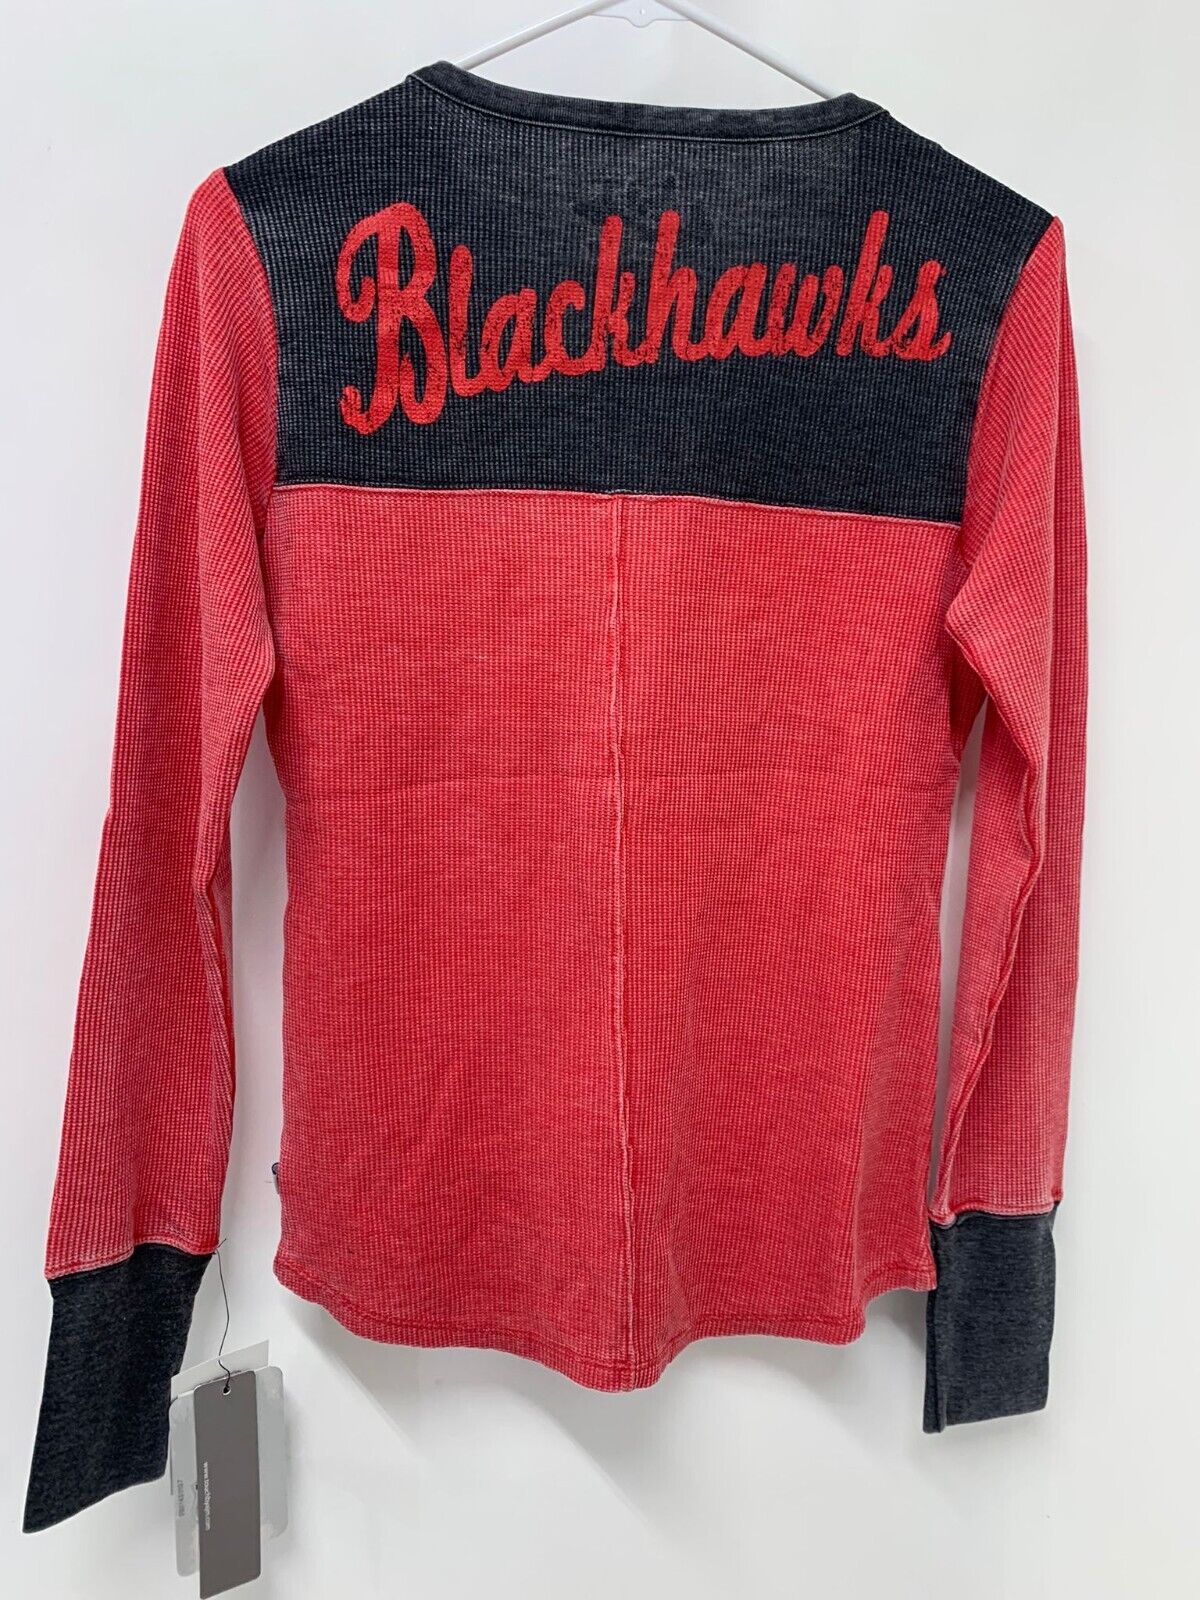 Chicago Blackhawks Womens S Distressed Thermal Long Sleeve Shirt Top NHL Touch